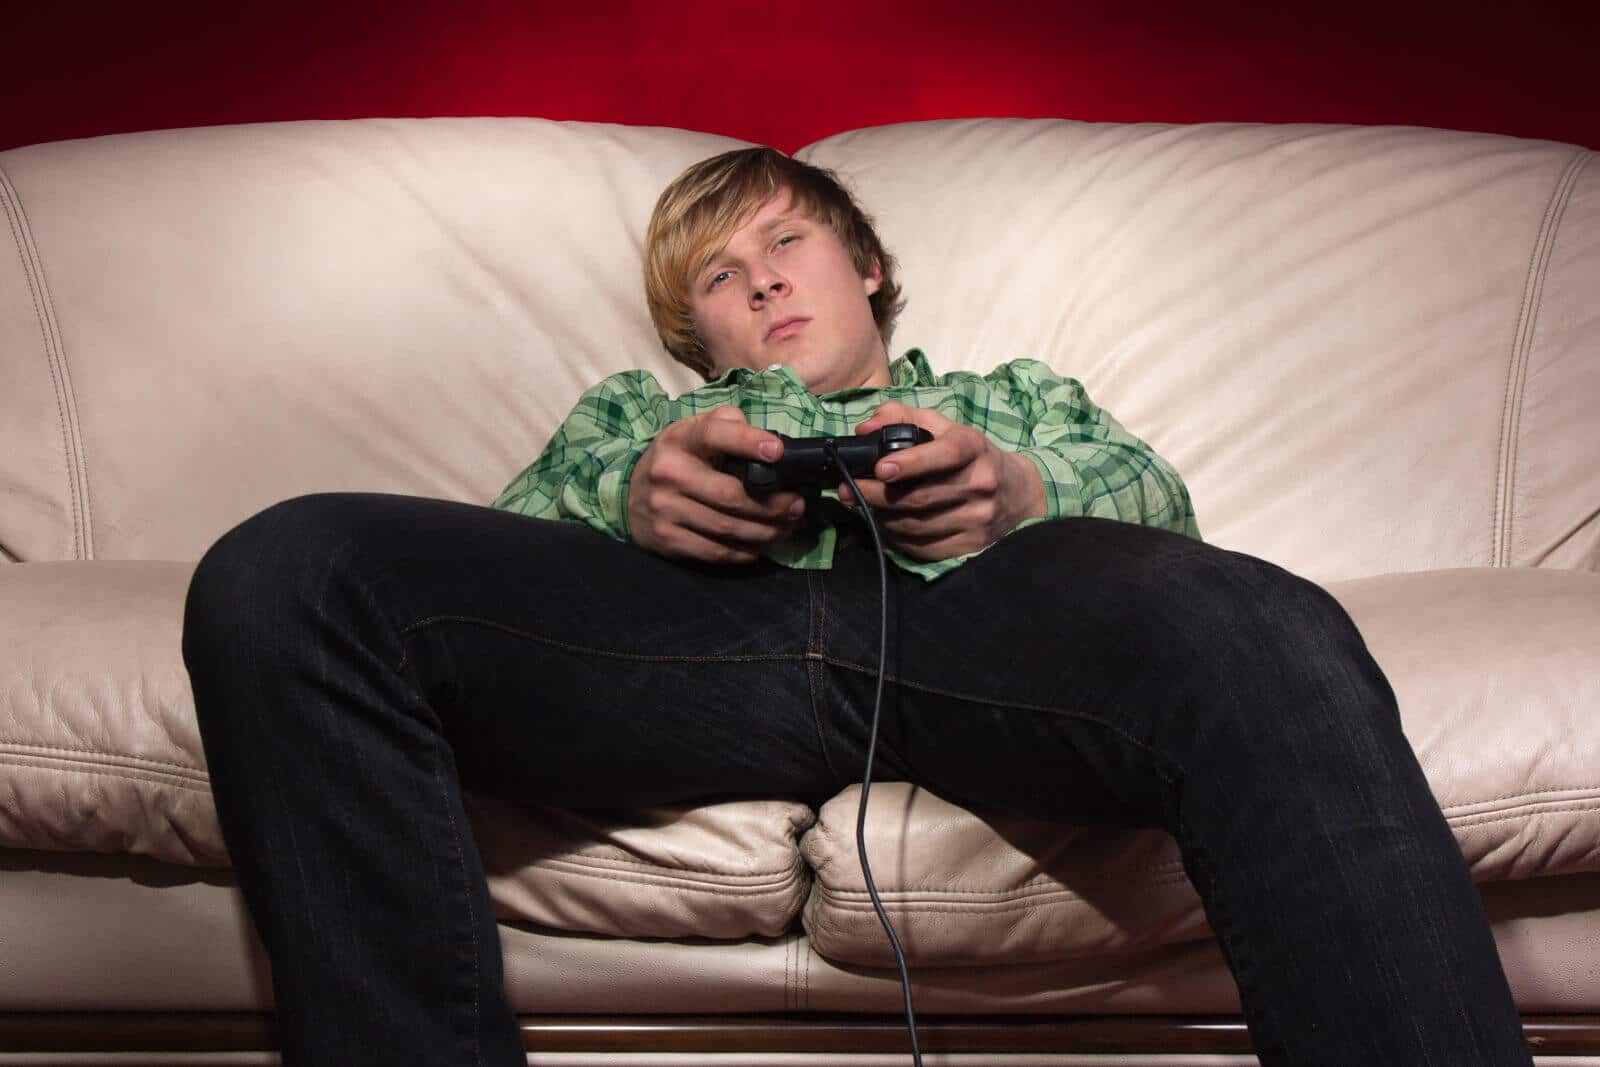 How to know if your child is addicted to video games and what to do about it